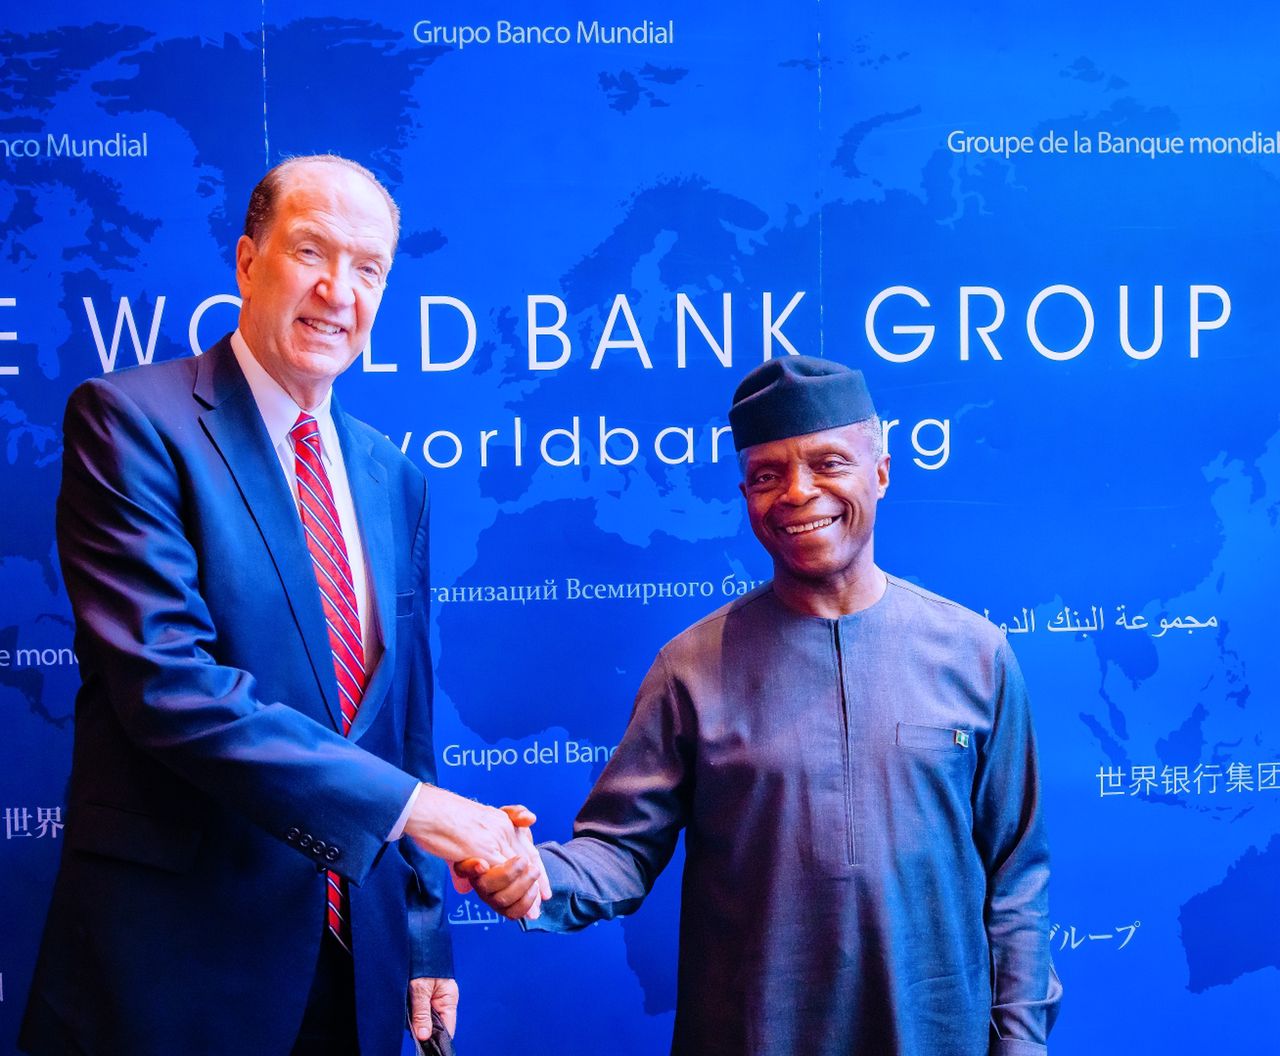 VP Osinbajo Meets With President Of The World Bank Group, David Malpass At The Bank’s Headquarters In Washington D.C, U.S.A On 01/09/2022